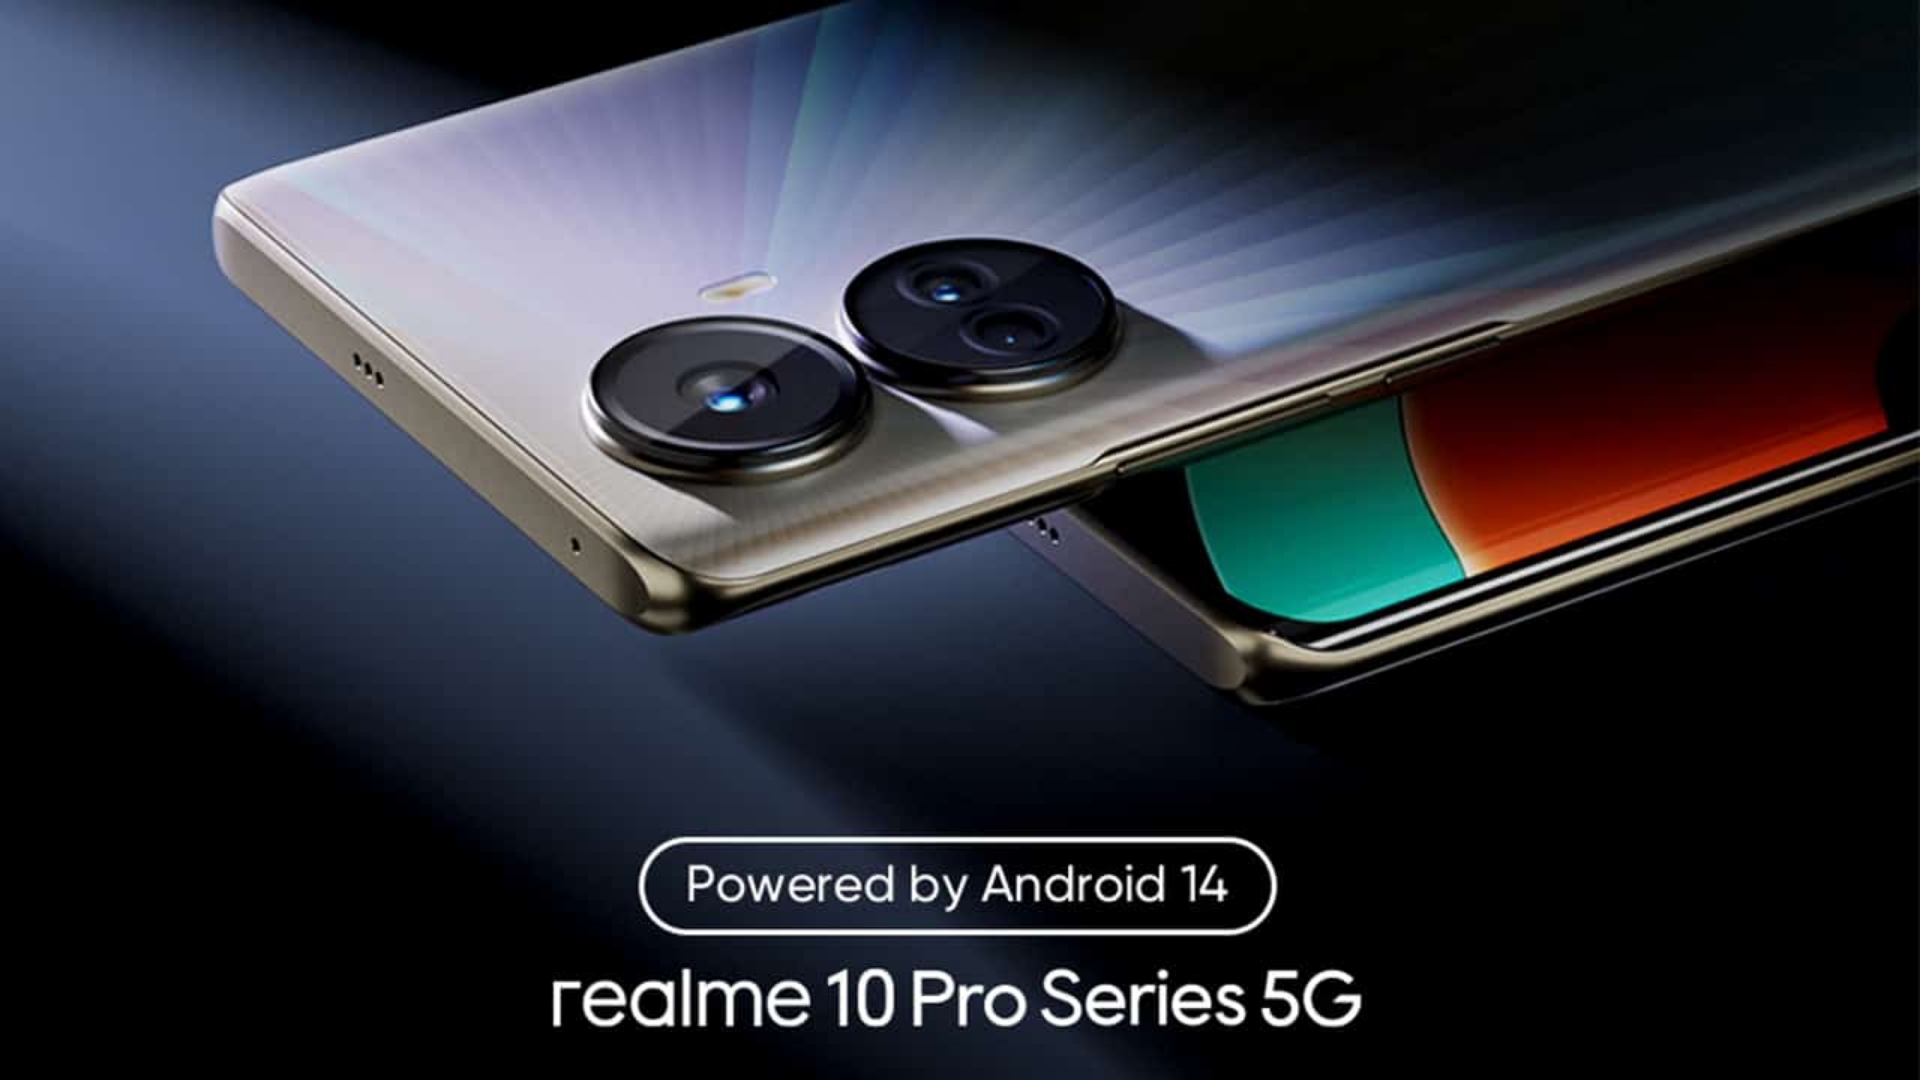 Early Access program brings realme UI 5.0 to the realme 10 Pro 5G line.